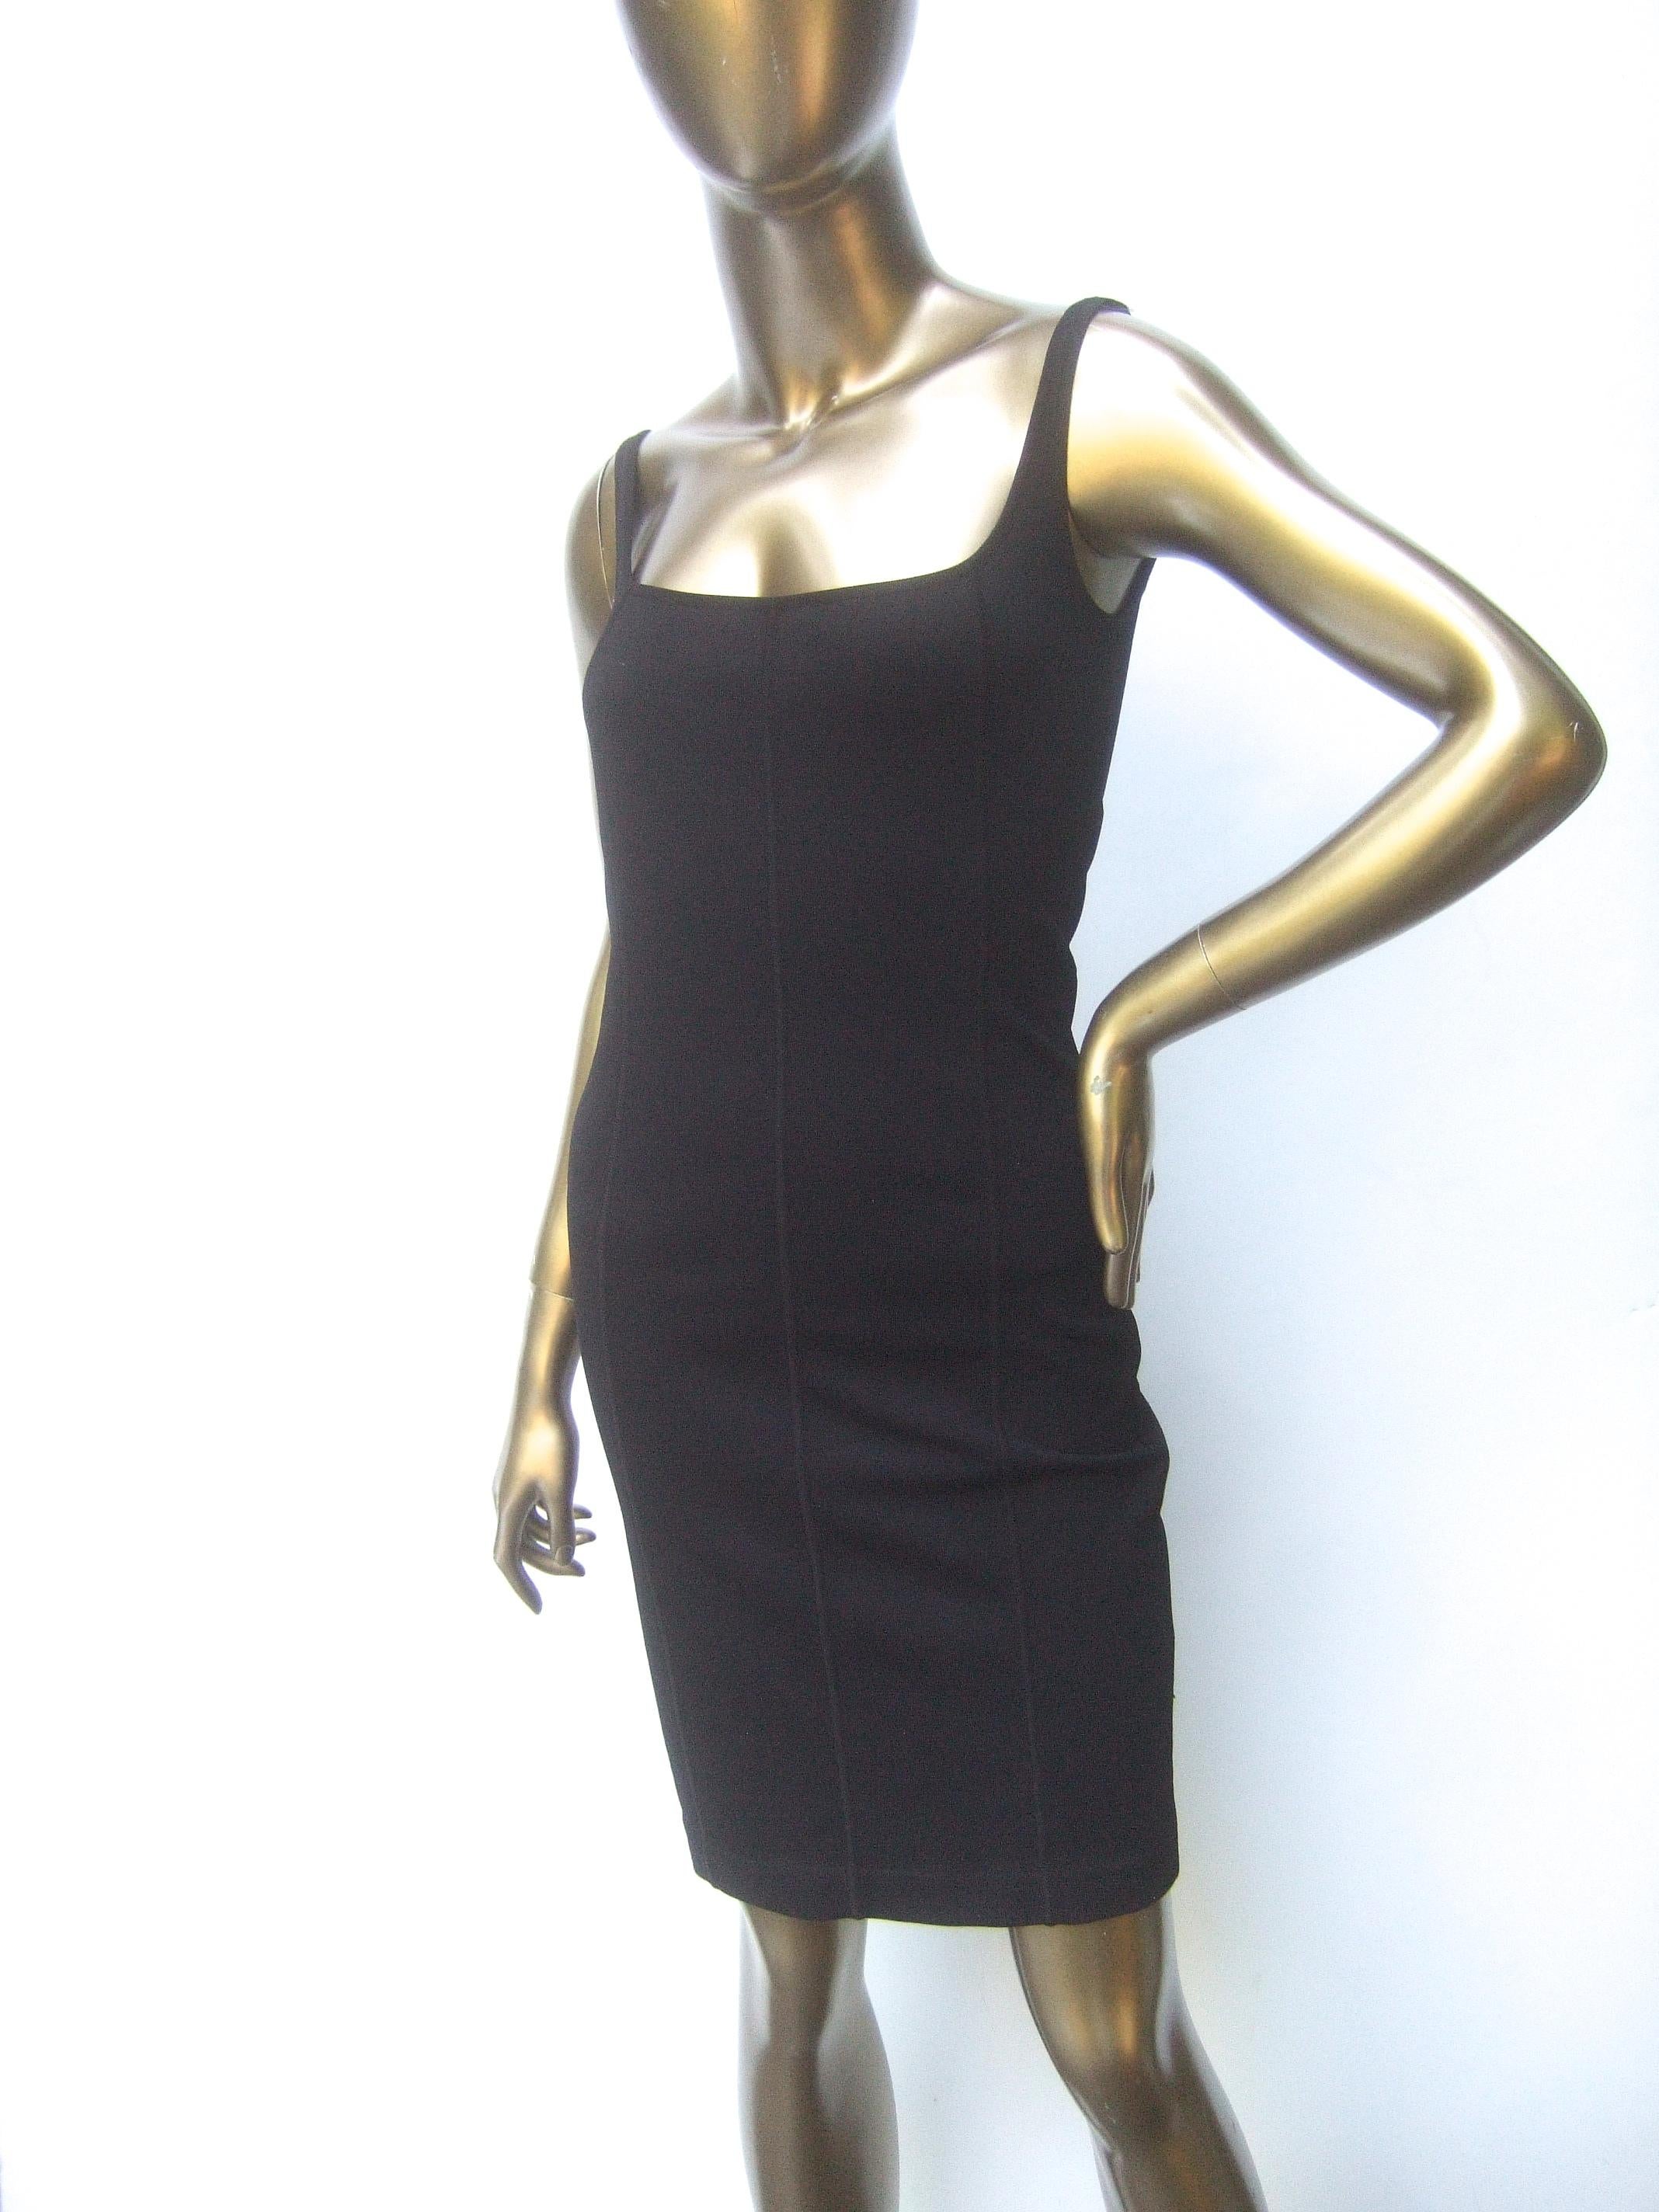 Gucci Italy Chic Black Stretch Knit Tank Dress Tom Ford Era c 1990s For Sale 5